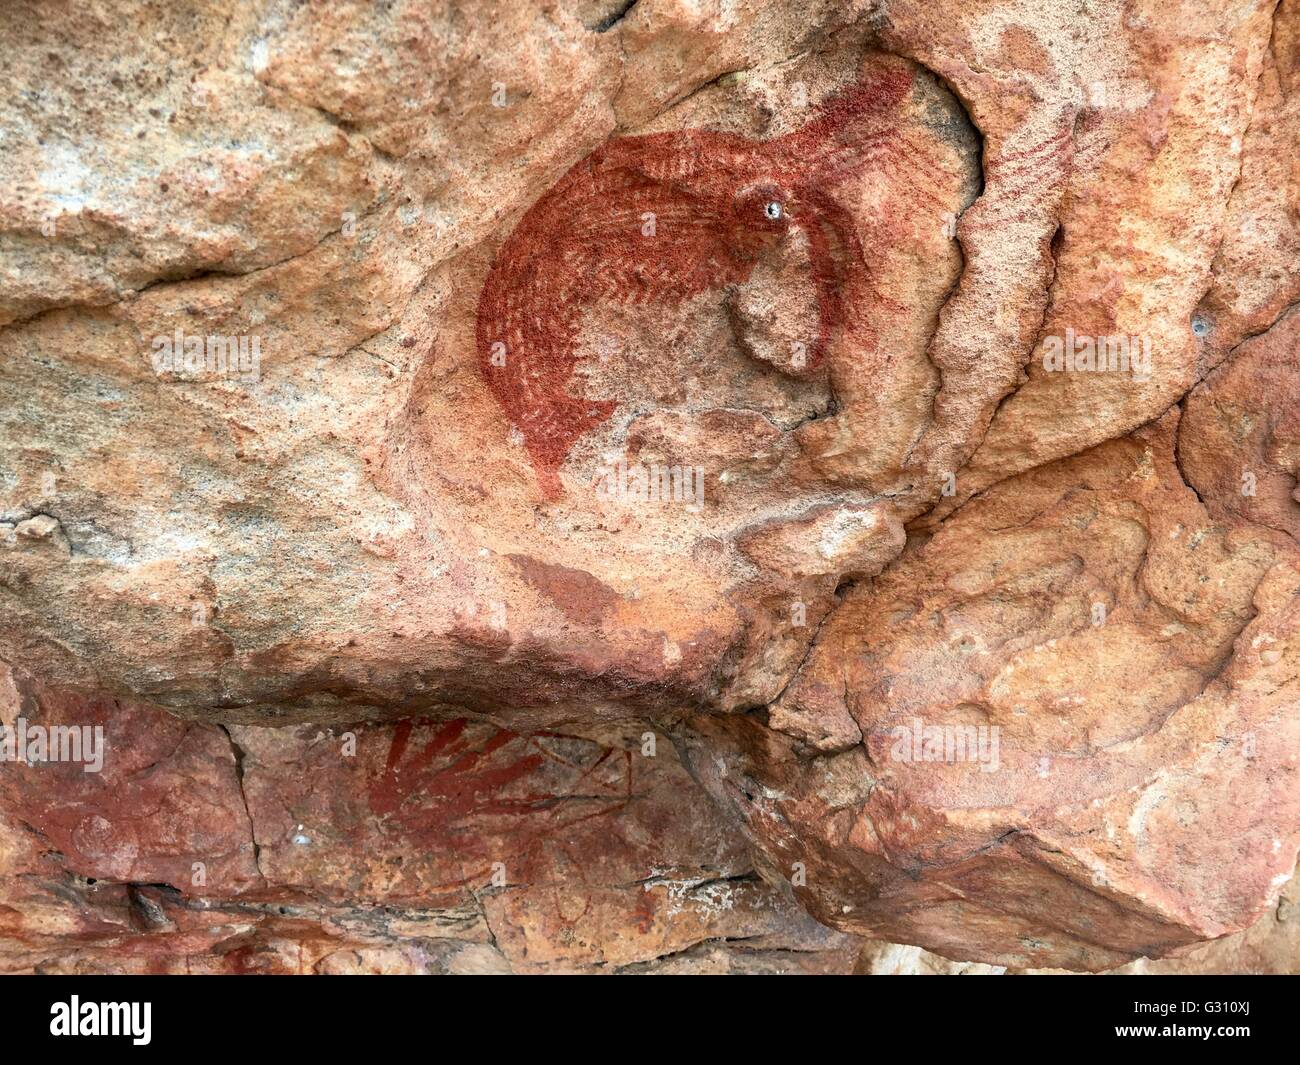 A red prawn painted in a cave known as Shrimp Rock at Hawk Dreaming, Cannon Hill, Kakadu National Park, Australia Stock Photo